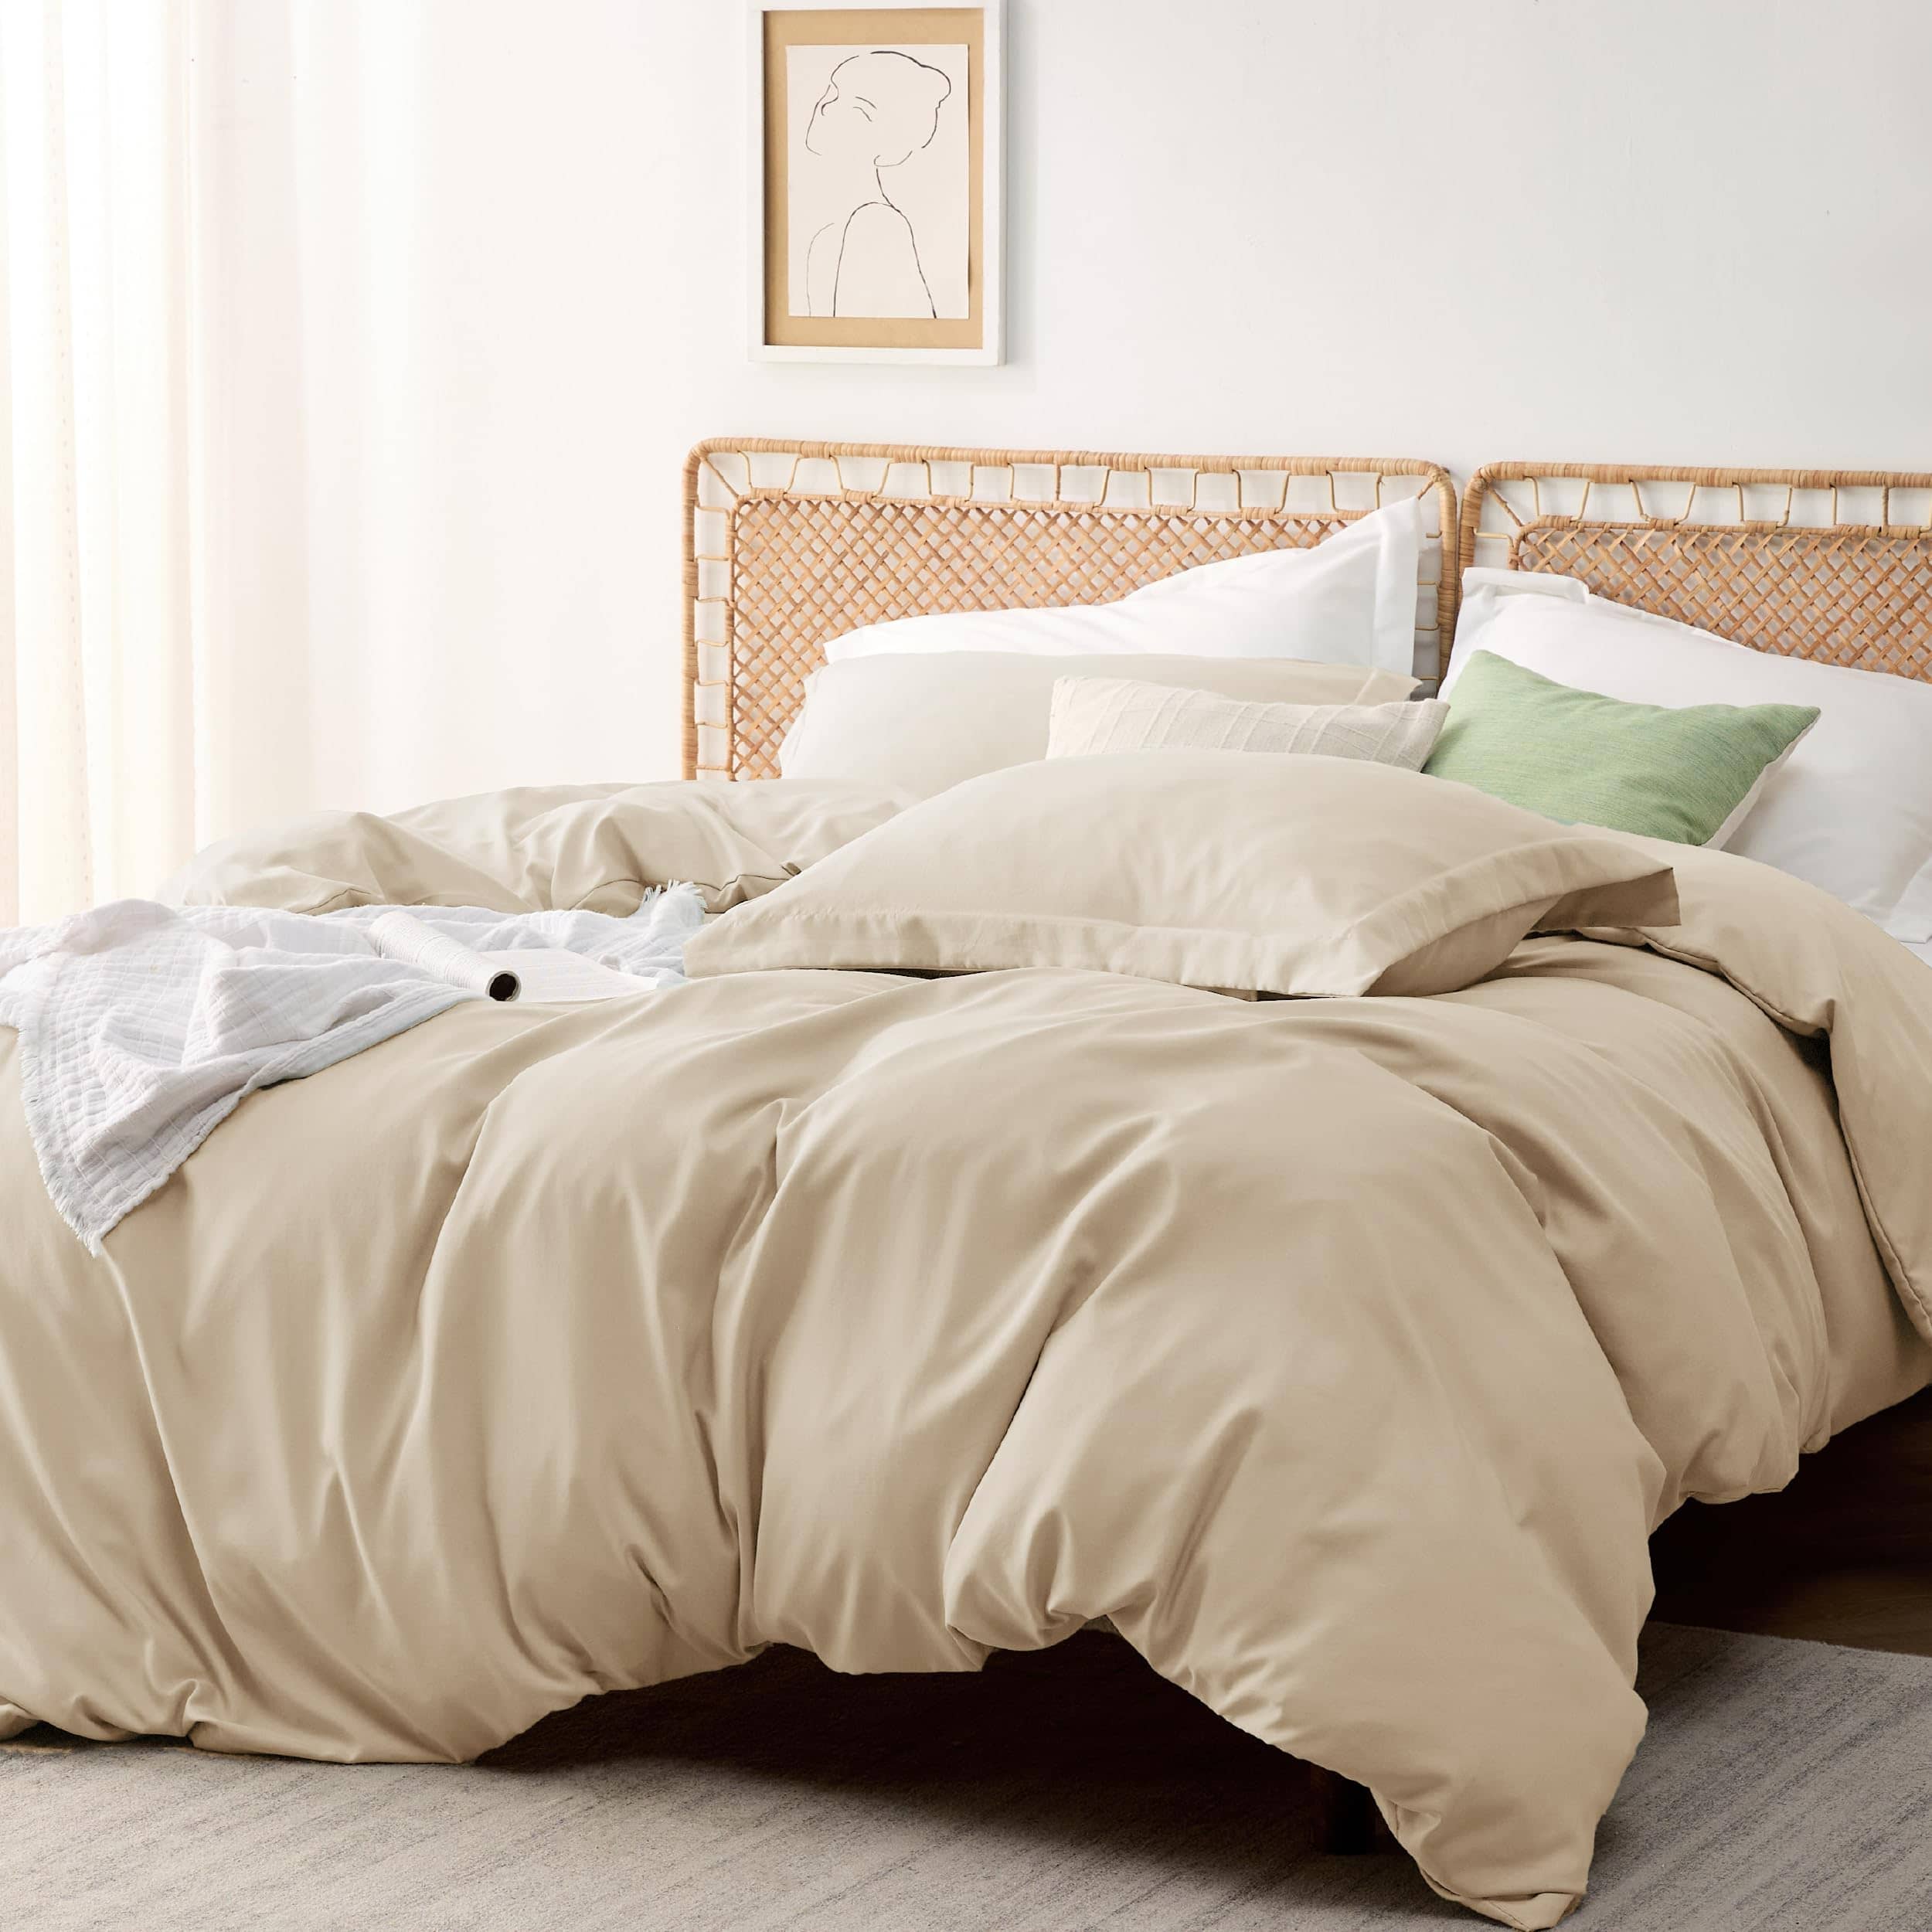 Polyester and Rayon Derived from Bamboo Blend Duvet Cover Set